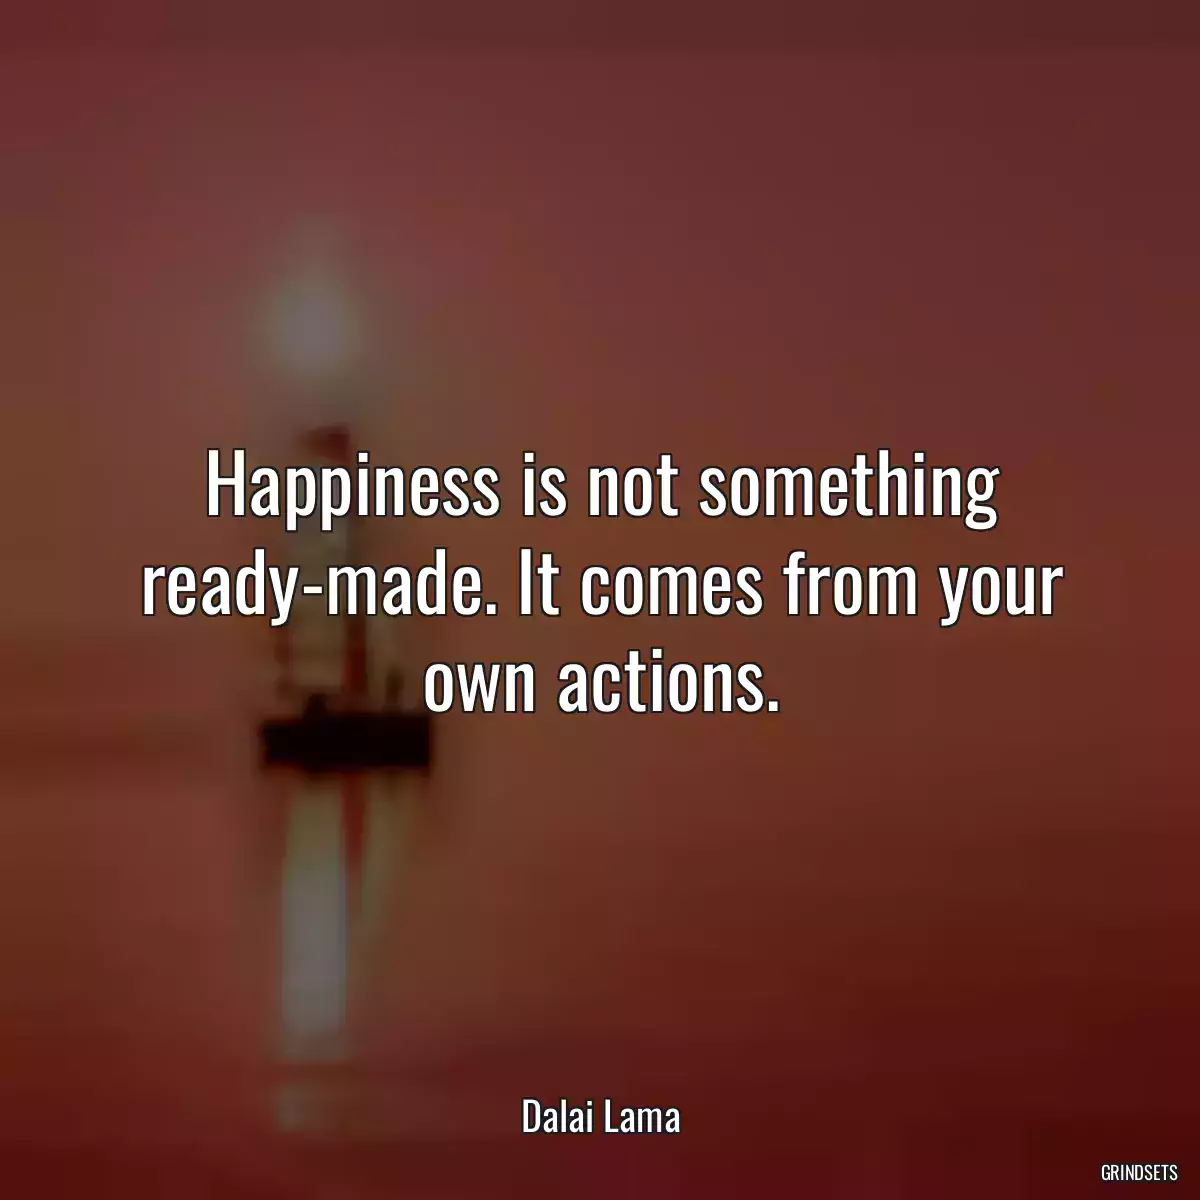 Happiness is not something ready-made. It comes from your own actions.